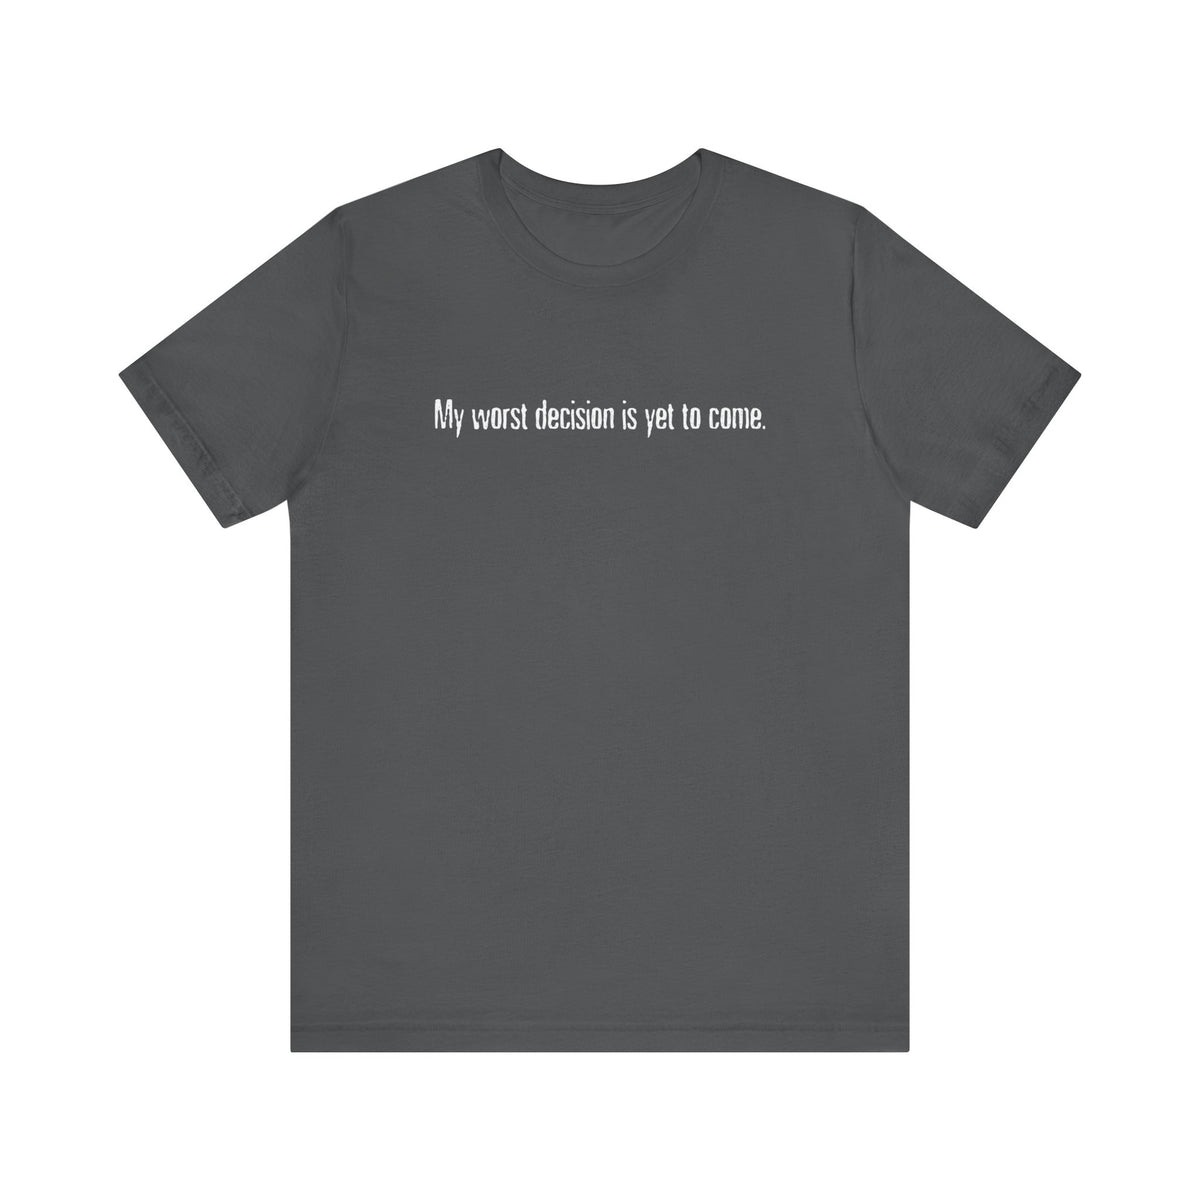 My Worst Decision Is Yet To Come. - Men's T-Shirt